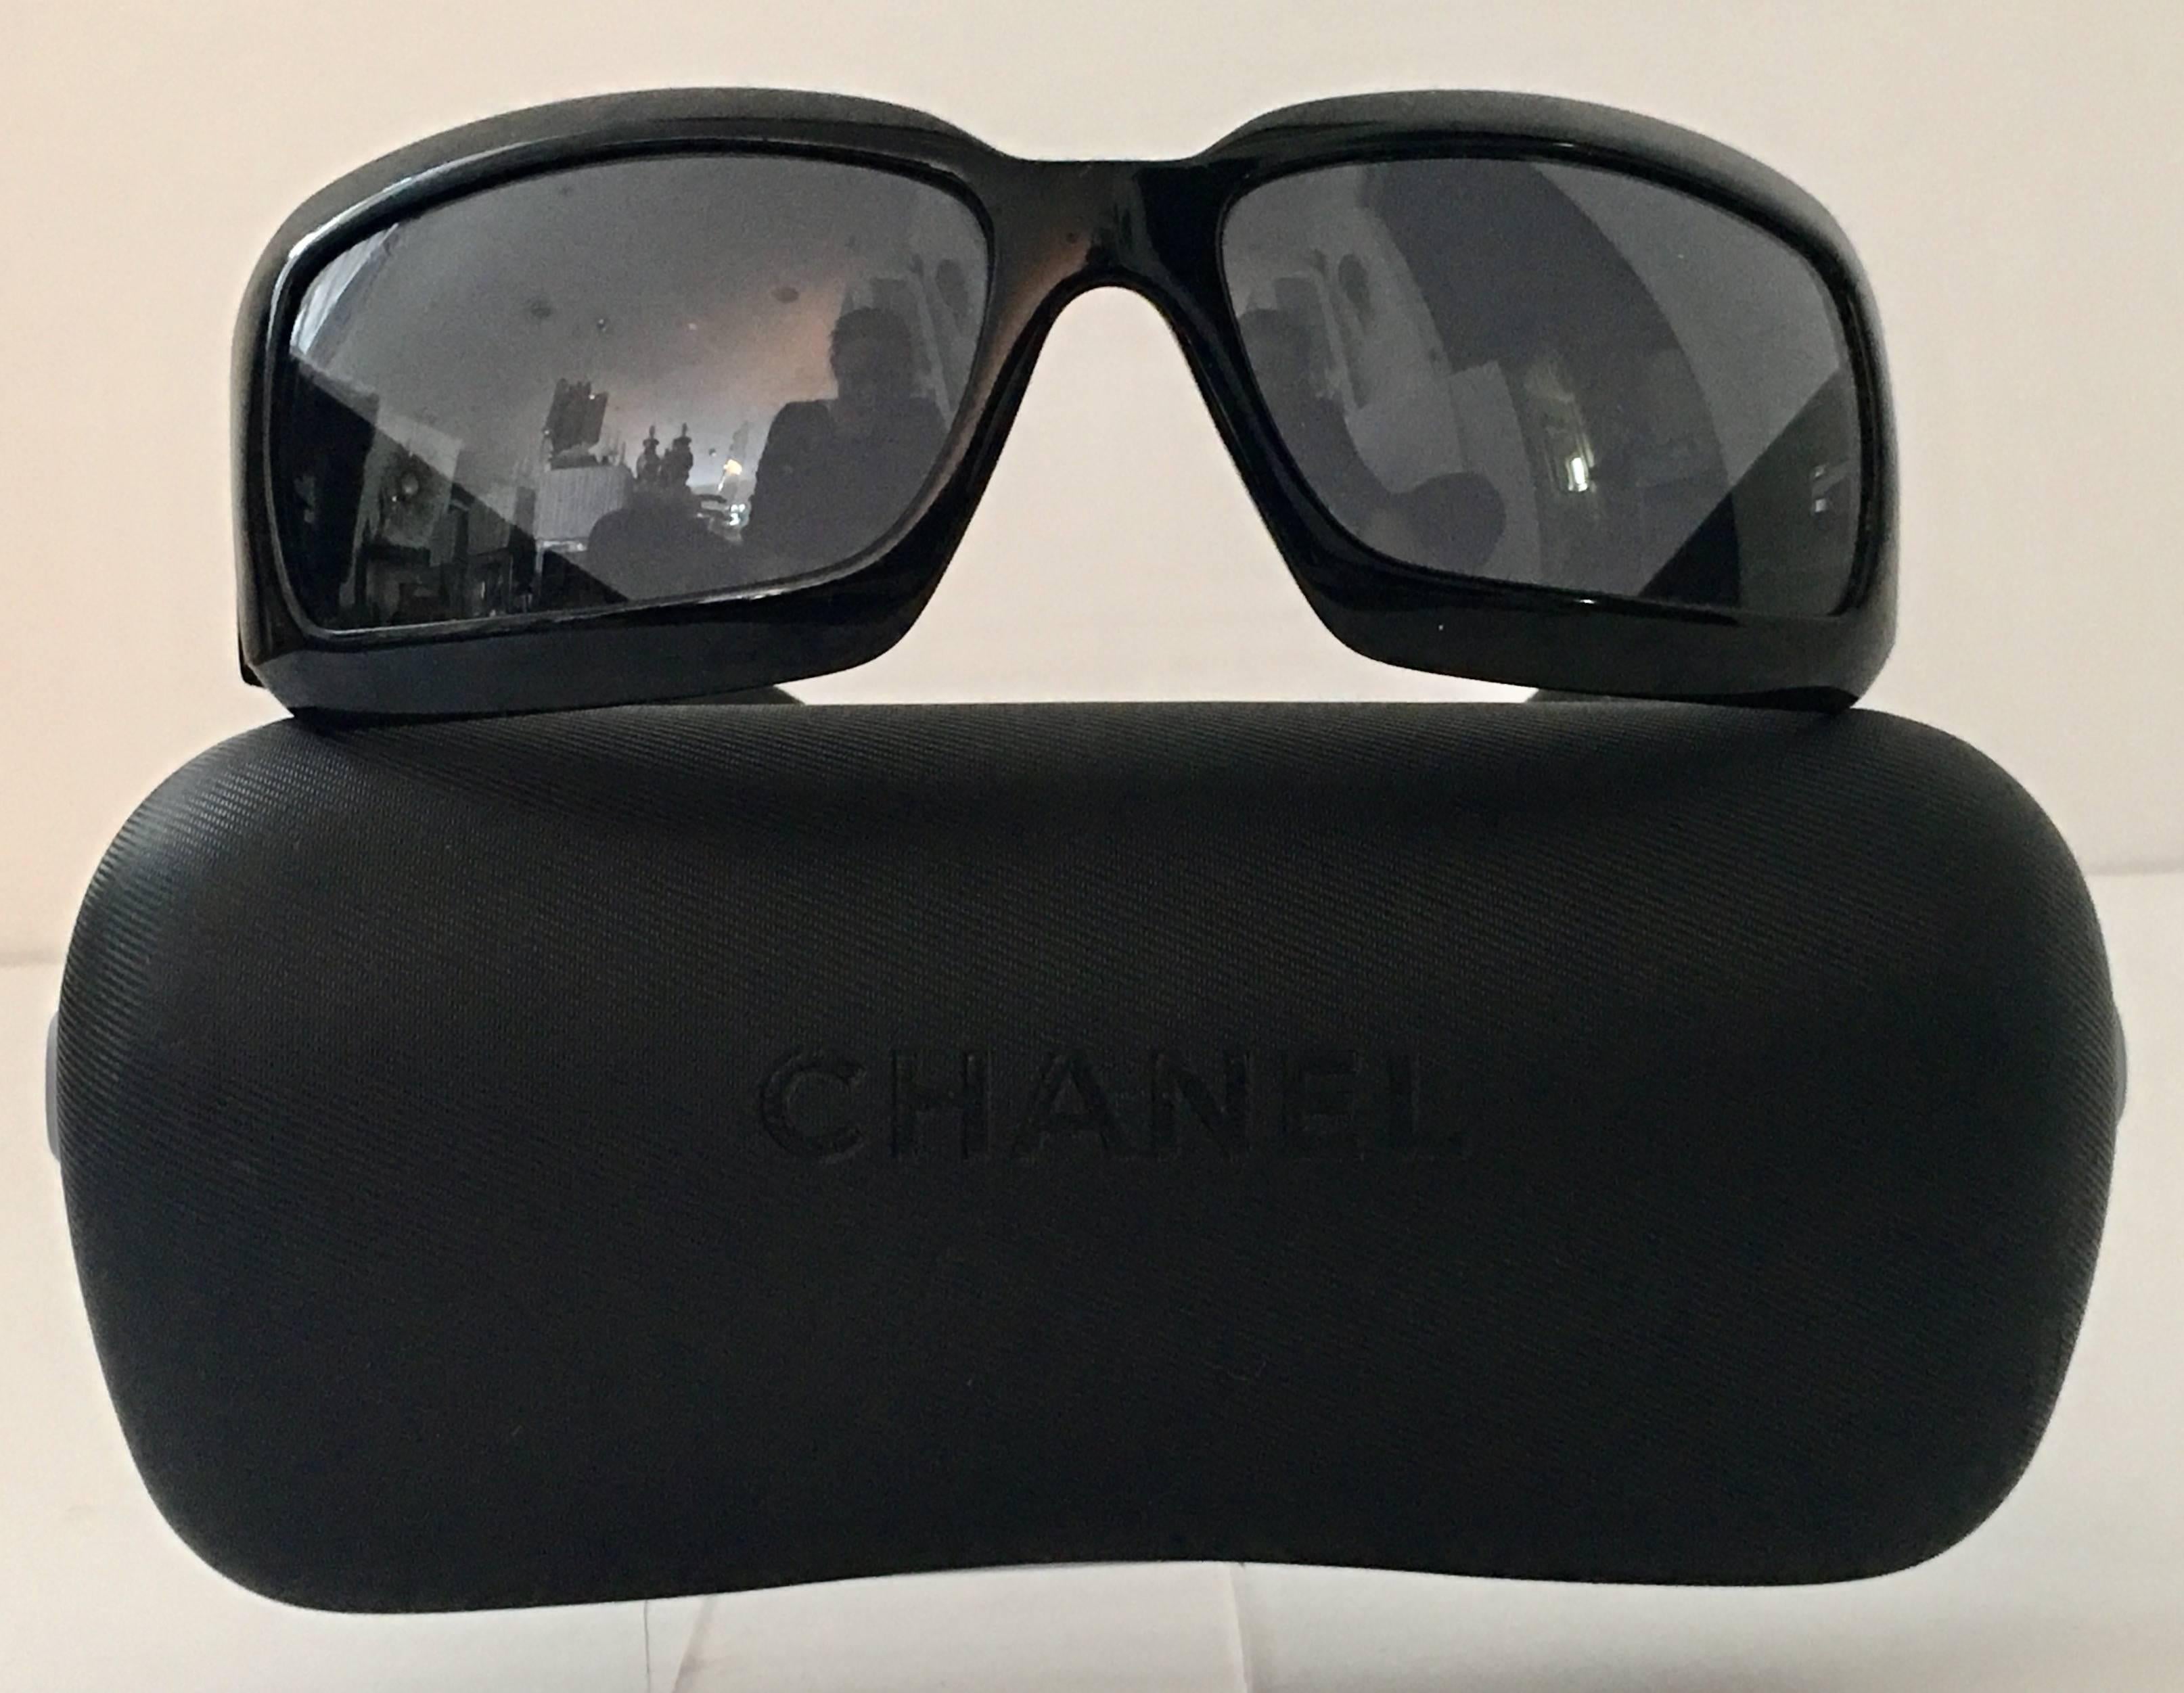 Classic Chanel black with white mother-of-pearl inlay "CC" logo sunglasses. Right side of right lens is signed Chanel. Interior arms read, 5076-Chanel Made In Italy. Includes Chanel hard protective storage case.